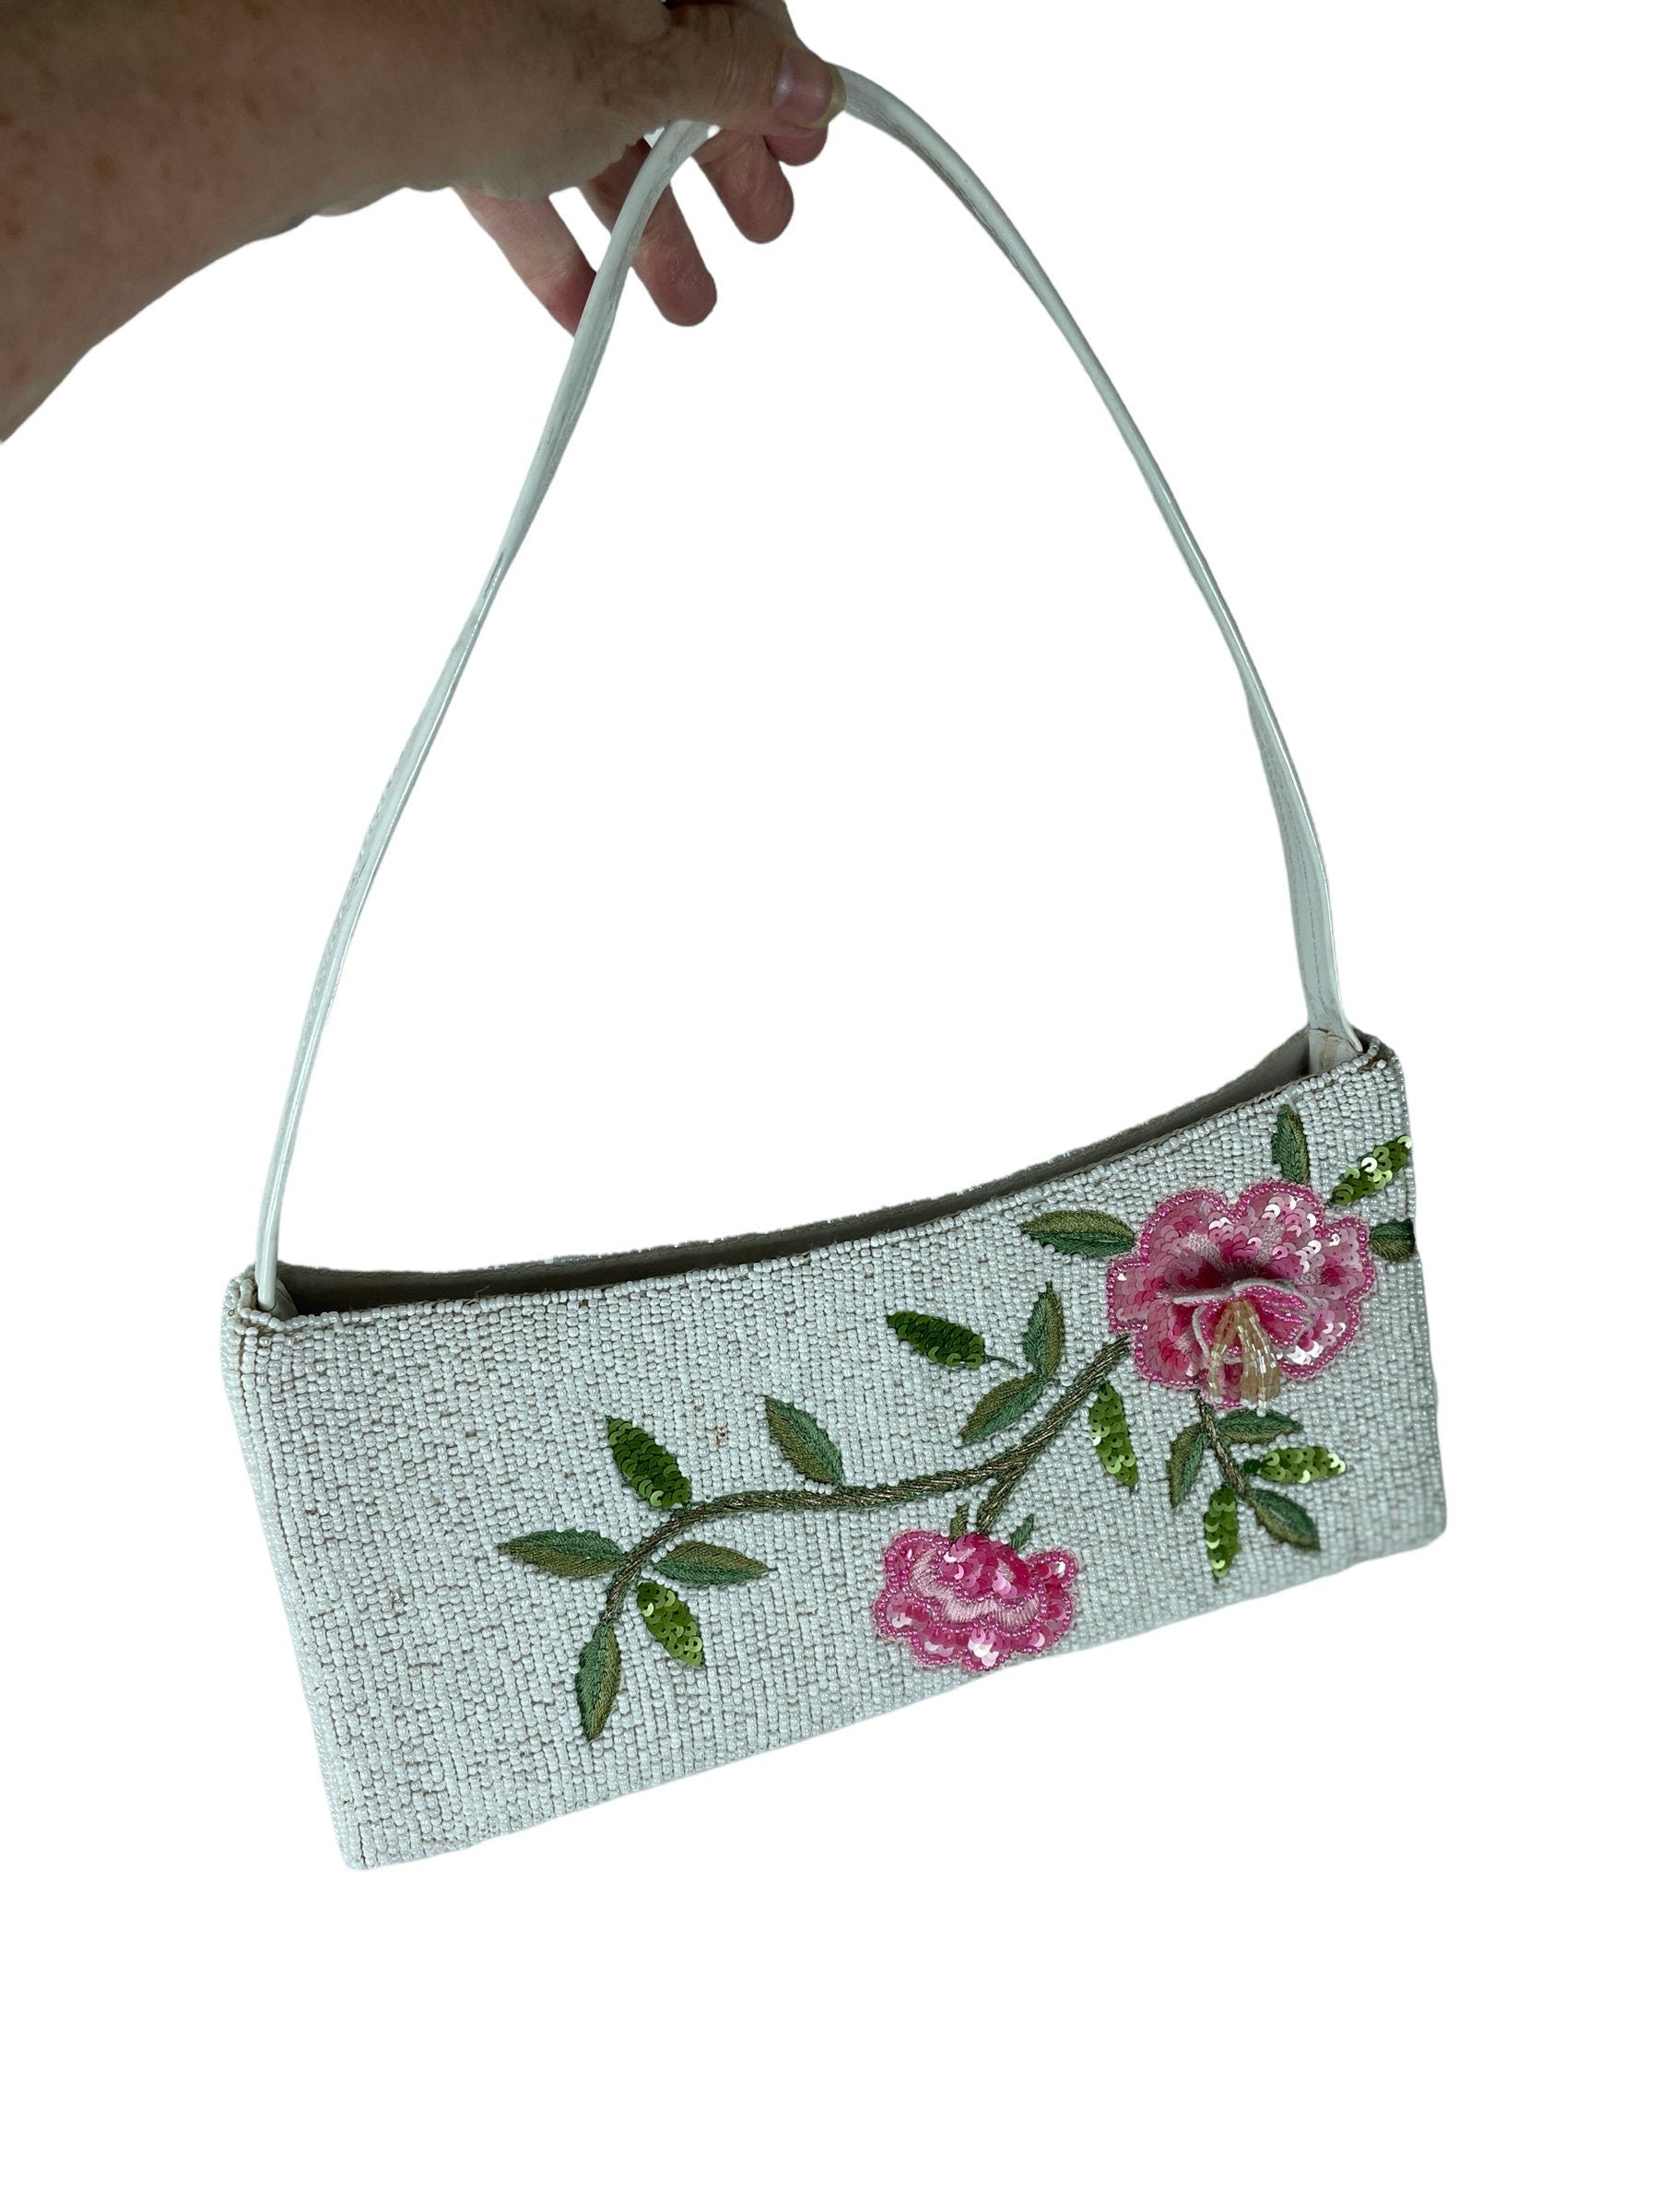 Hand Painted White Faux Leather Purse Handbag With Floral Pattern Pink  Magnolia Flowers Original Art - Etsy | Faux leather purse, Painted bags,  Painted purse